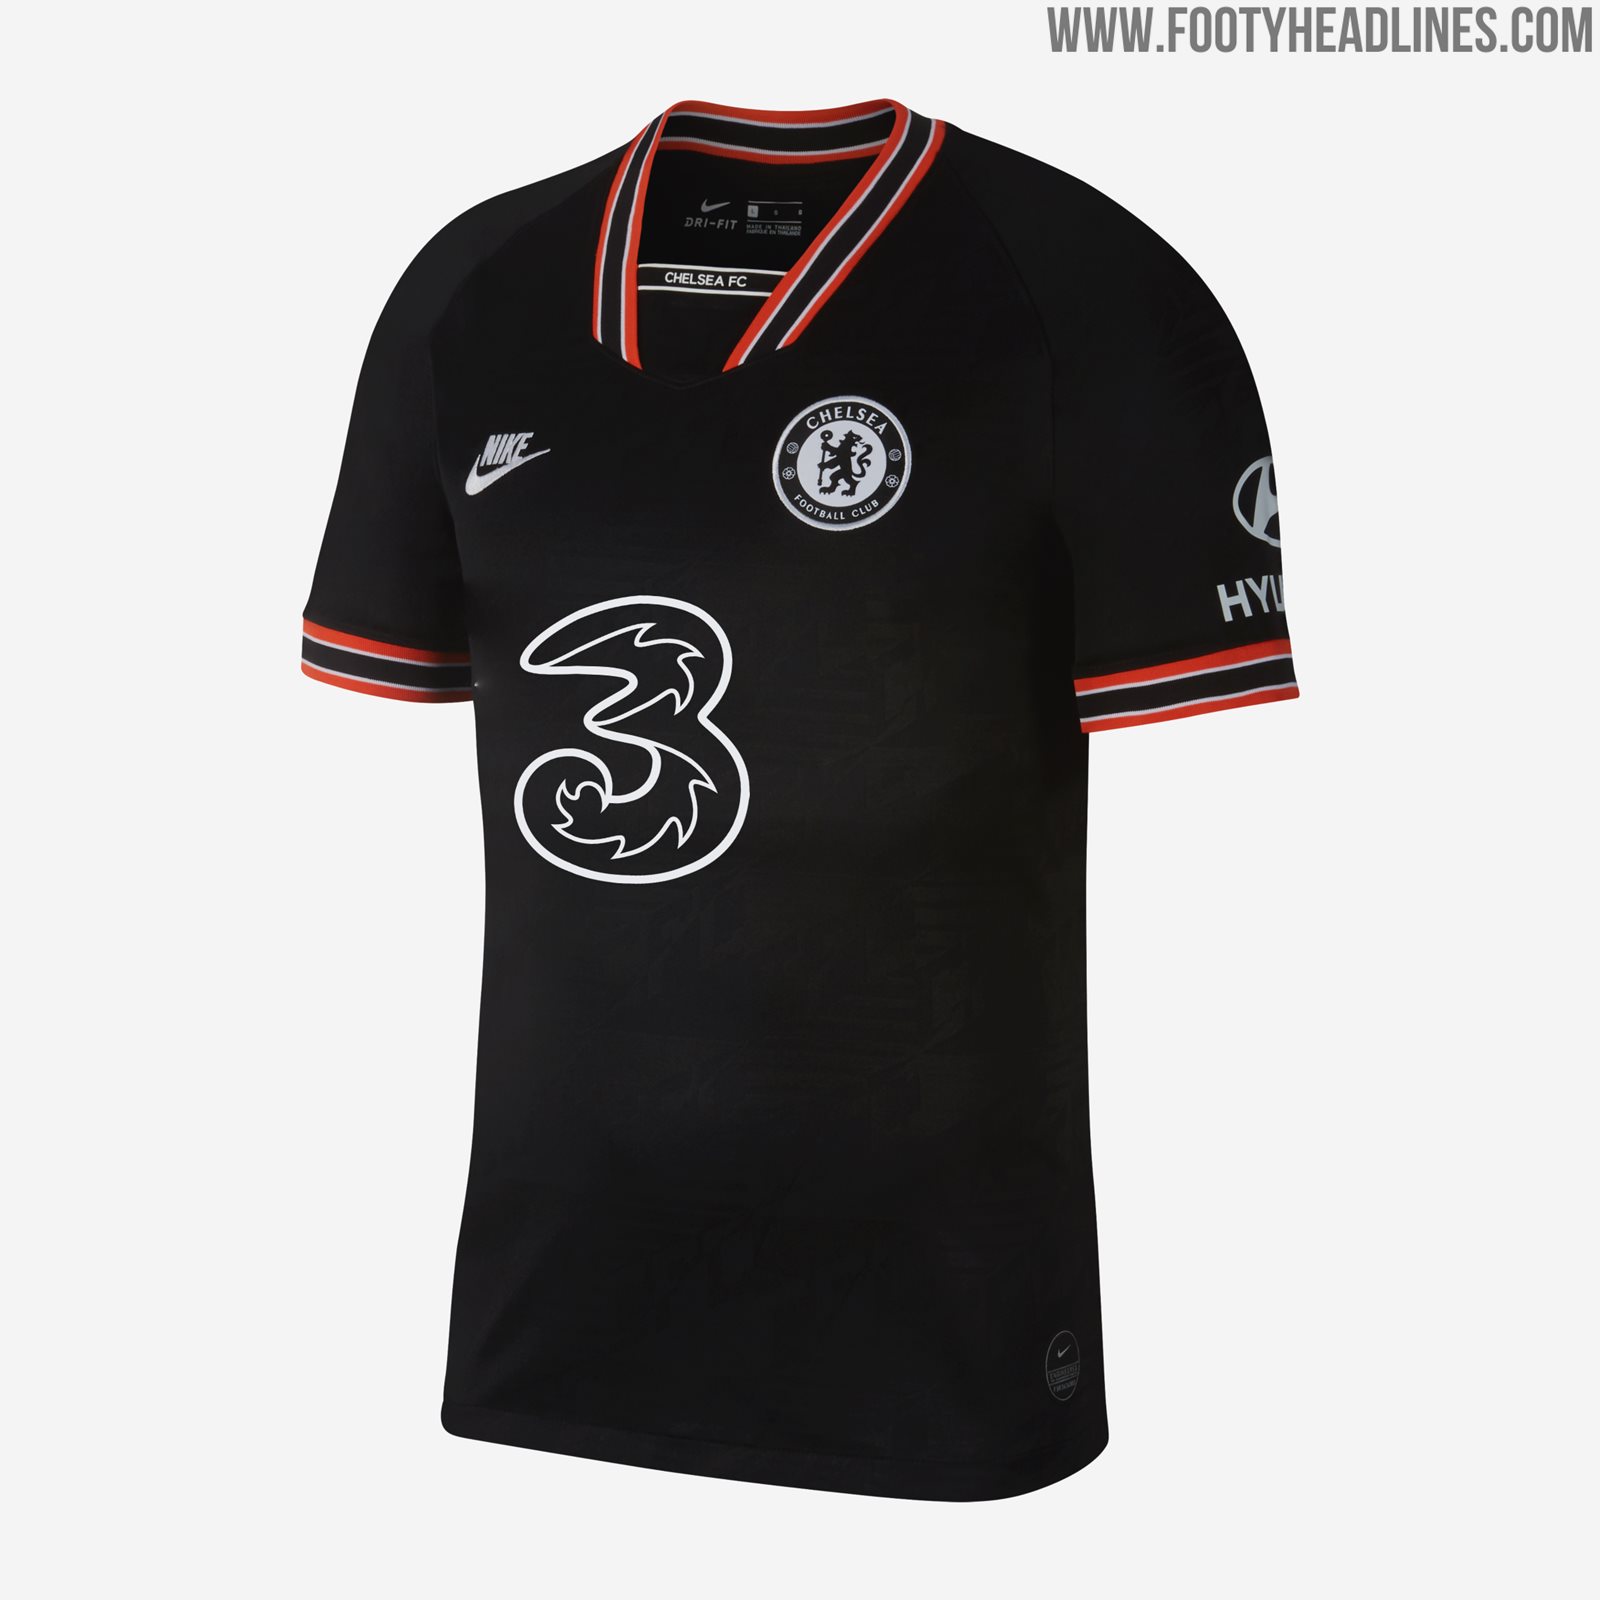 New Chelsea Kit Sponsor - Here's How the '3' Logo Could Look Like on ...